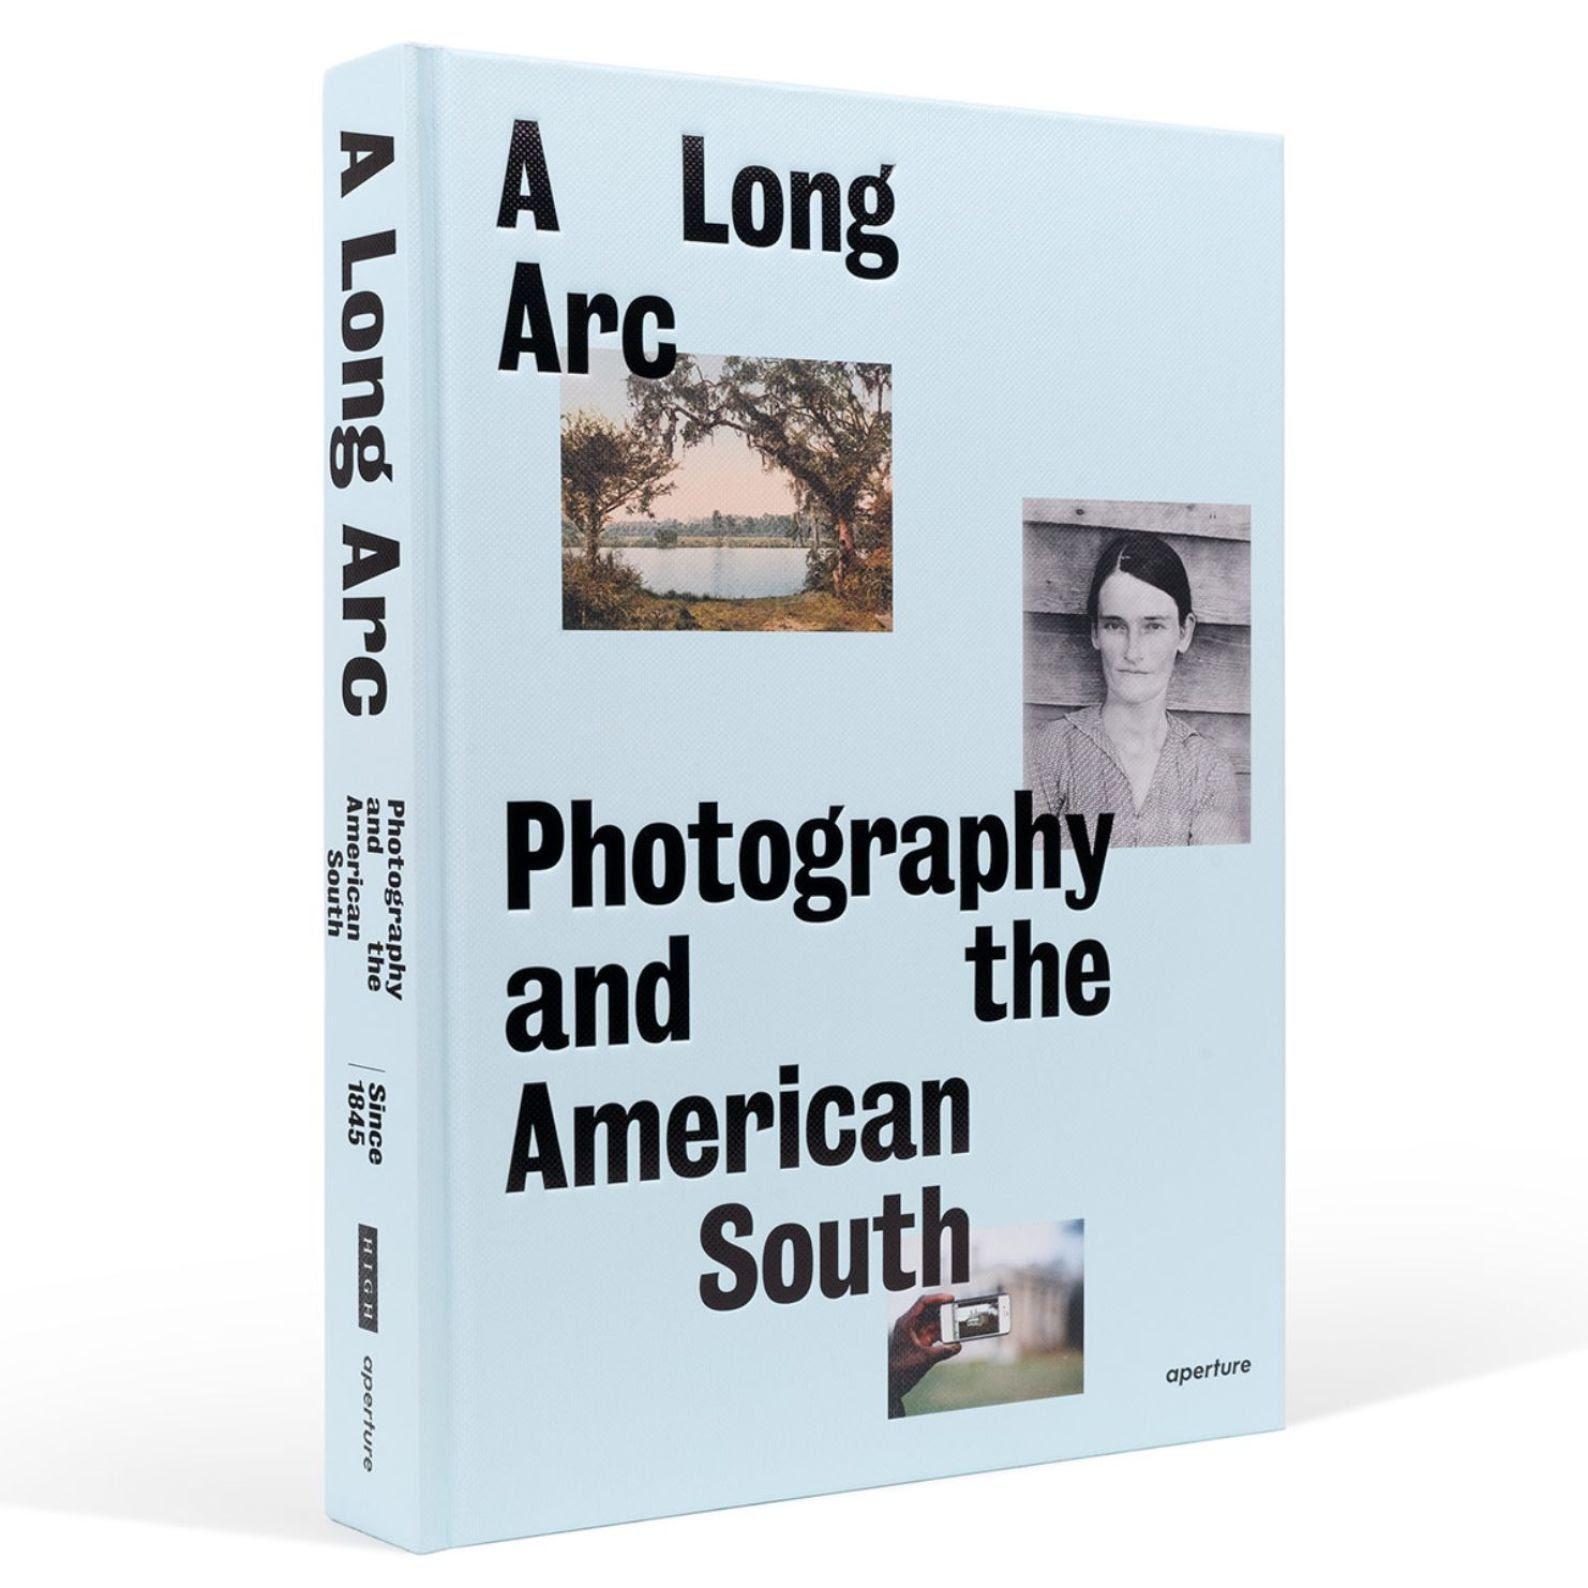 Art and Documentary Photography - Loading photo_Aperture_book.jpeg